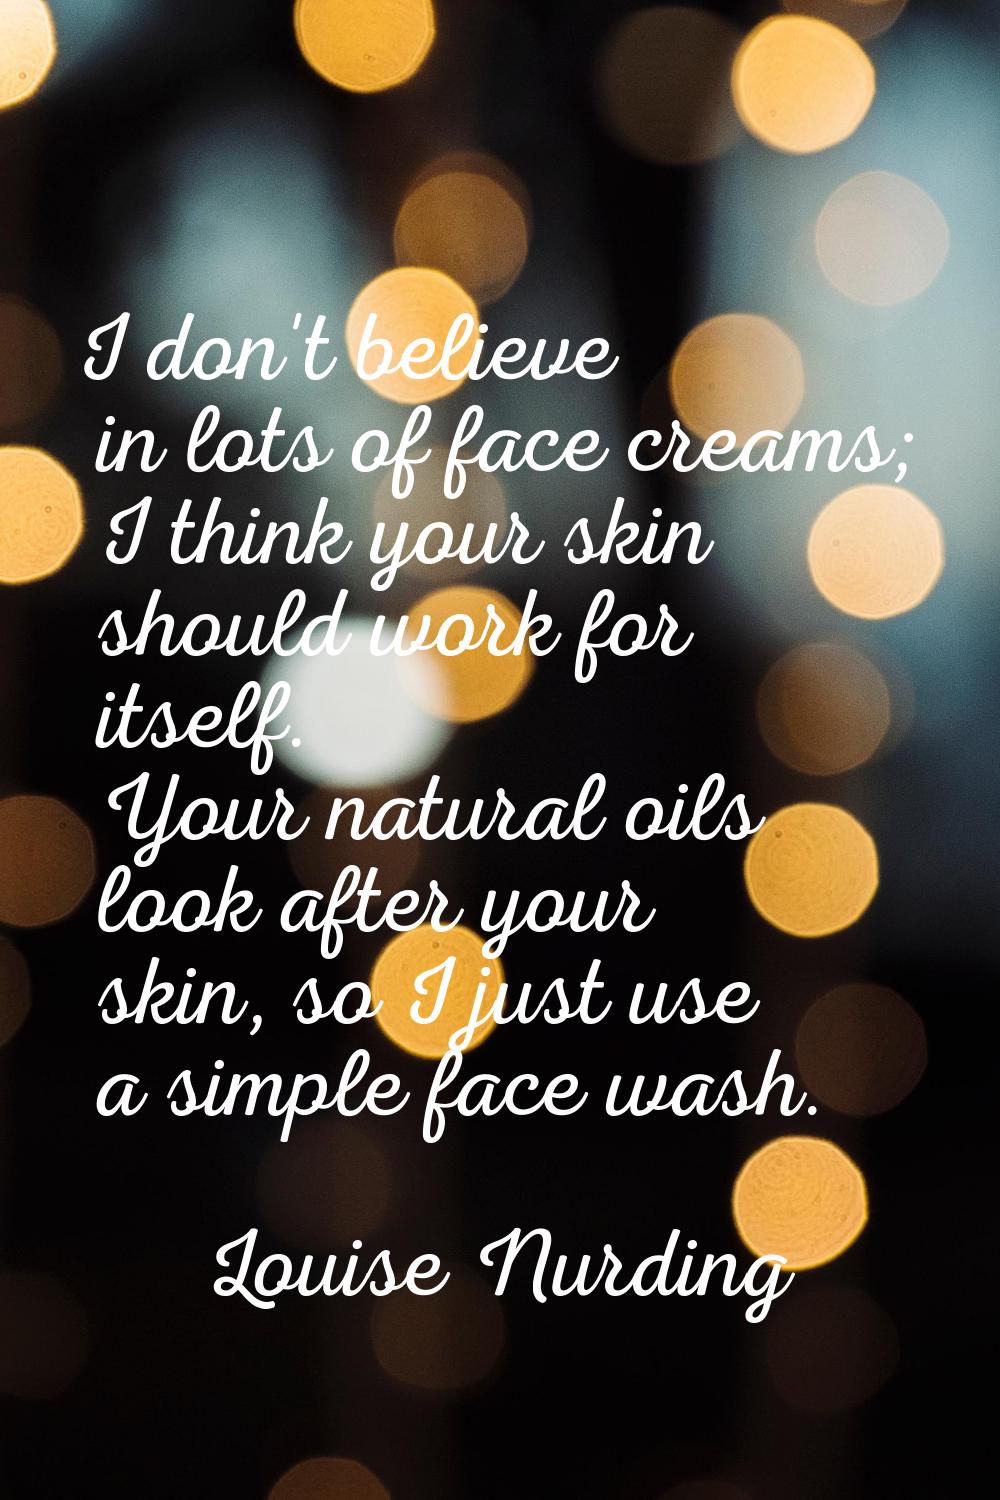 I don't believe in lots of face creams; I think your skin should work for itself. Your natural oils